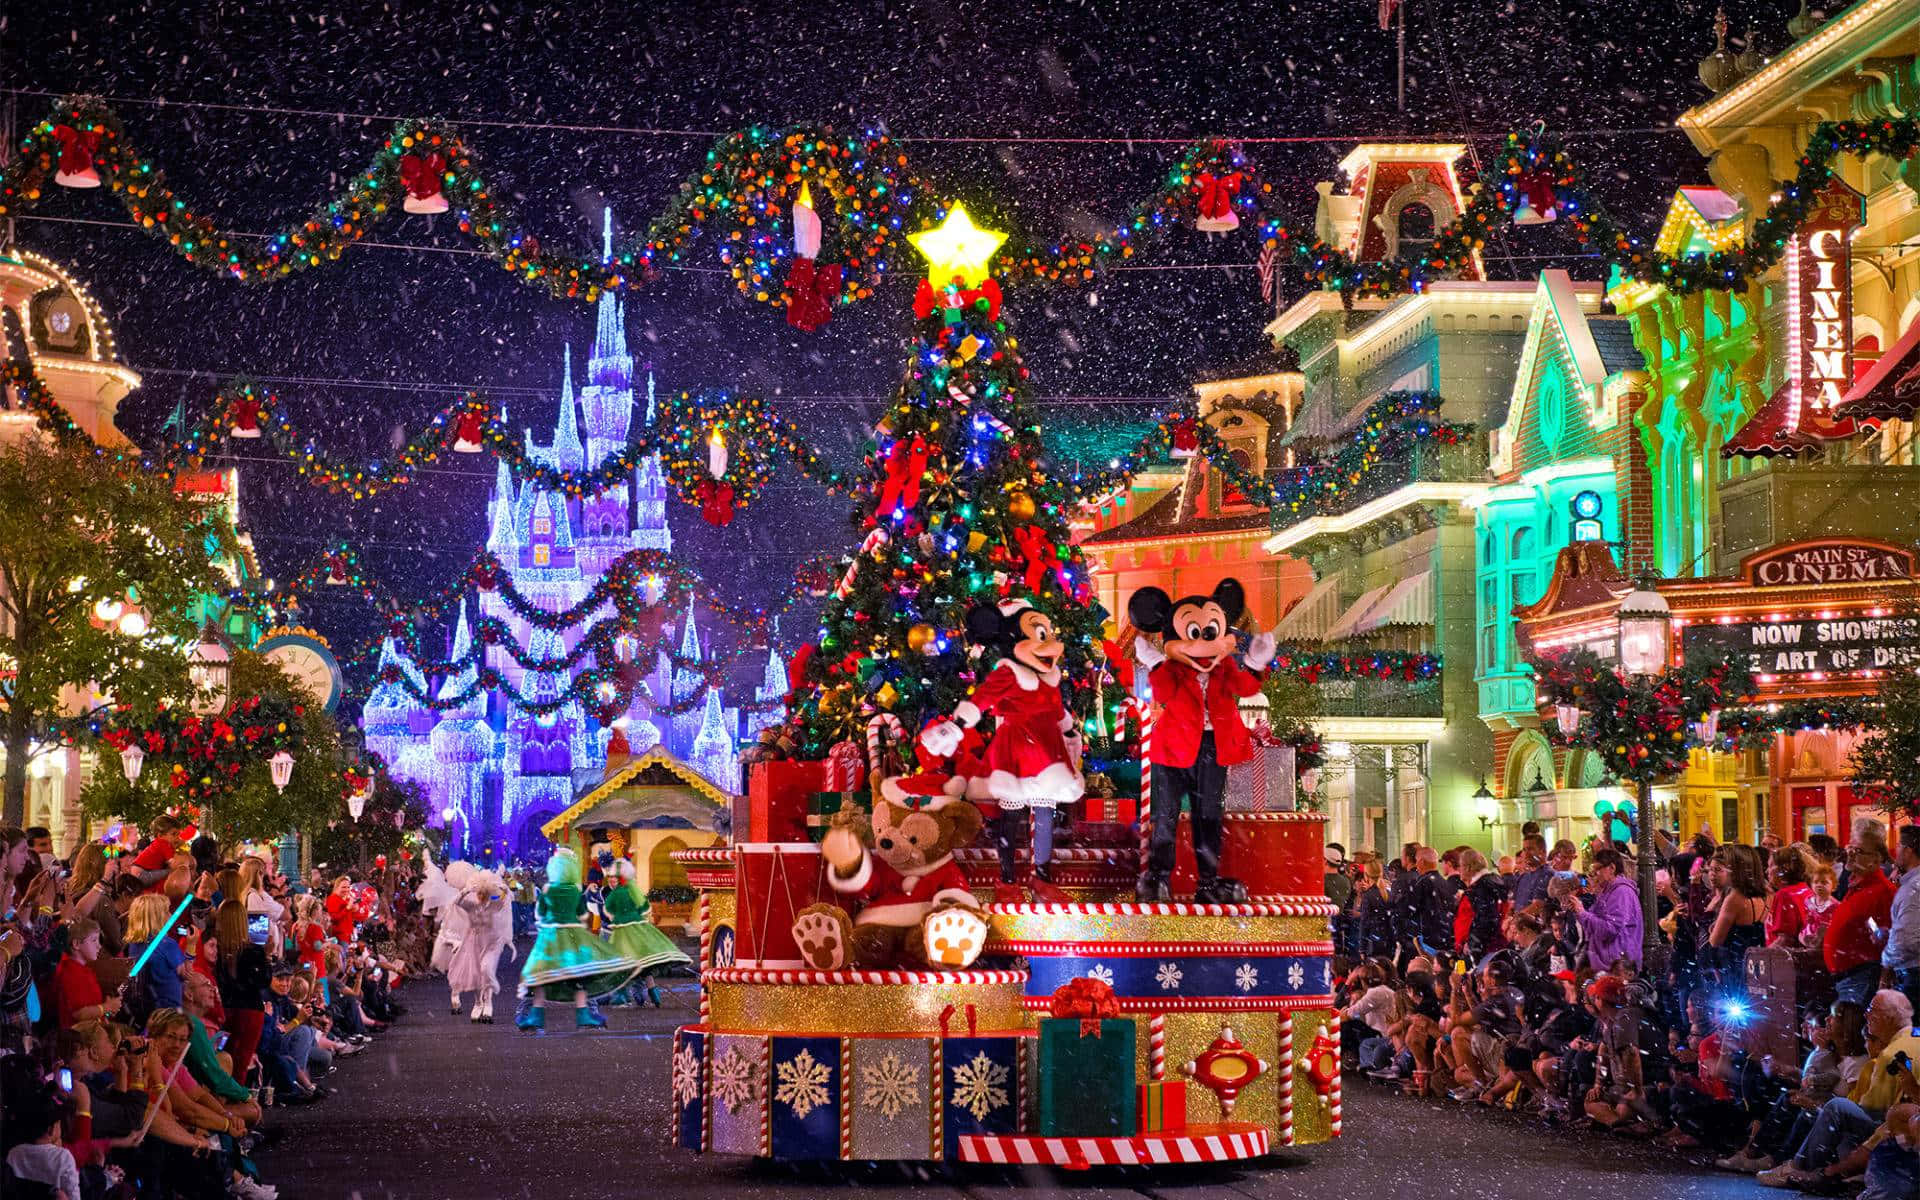 Snowy Winter Wonderland with Mickey Mouse and Friends